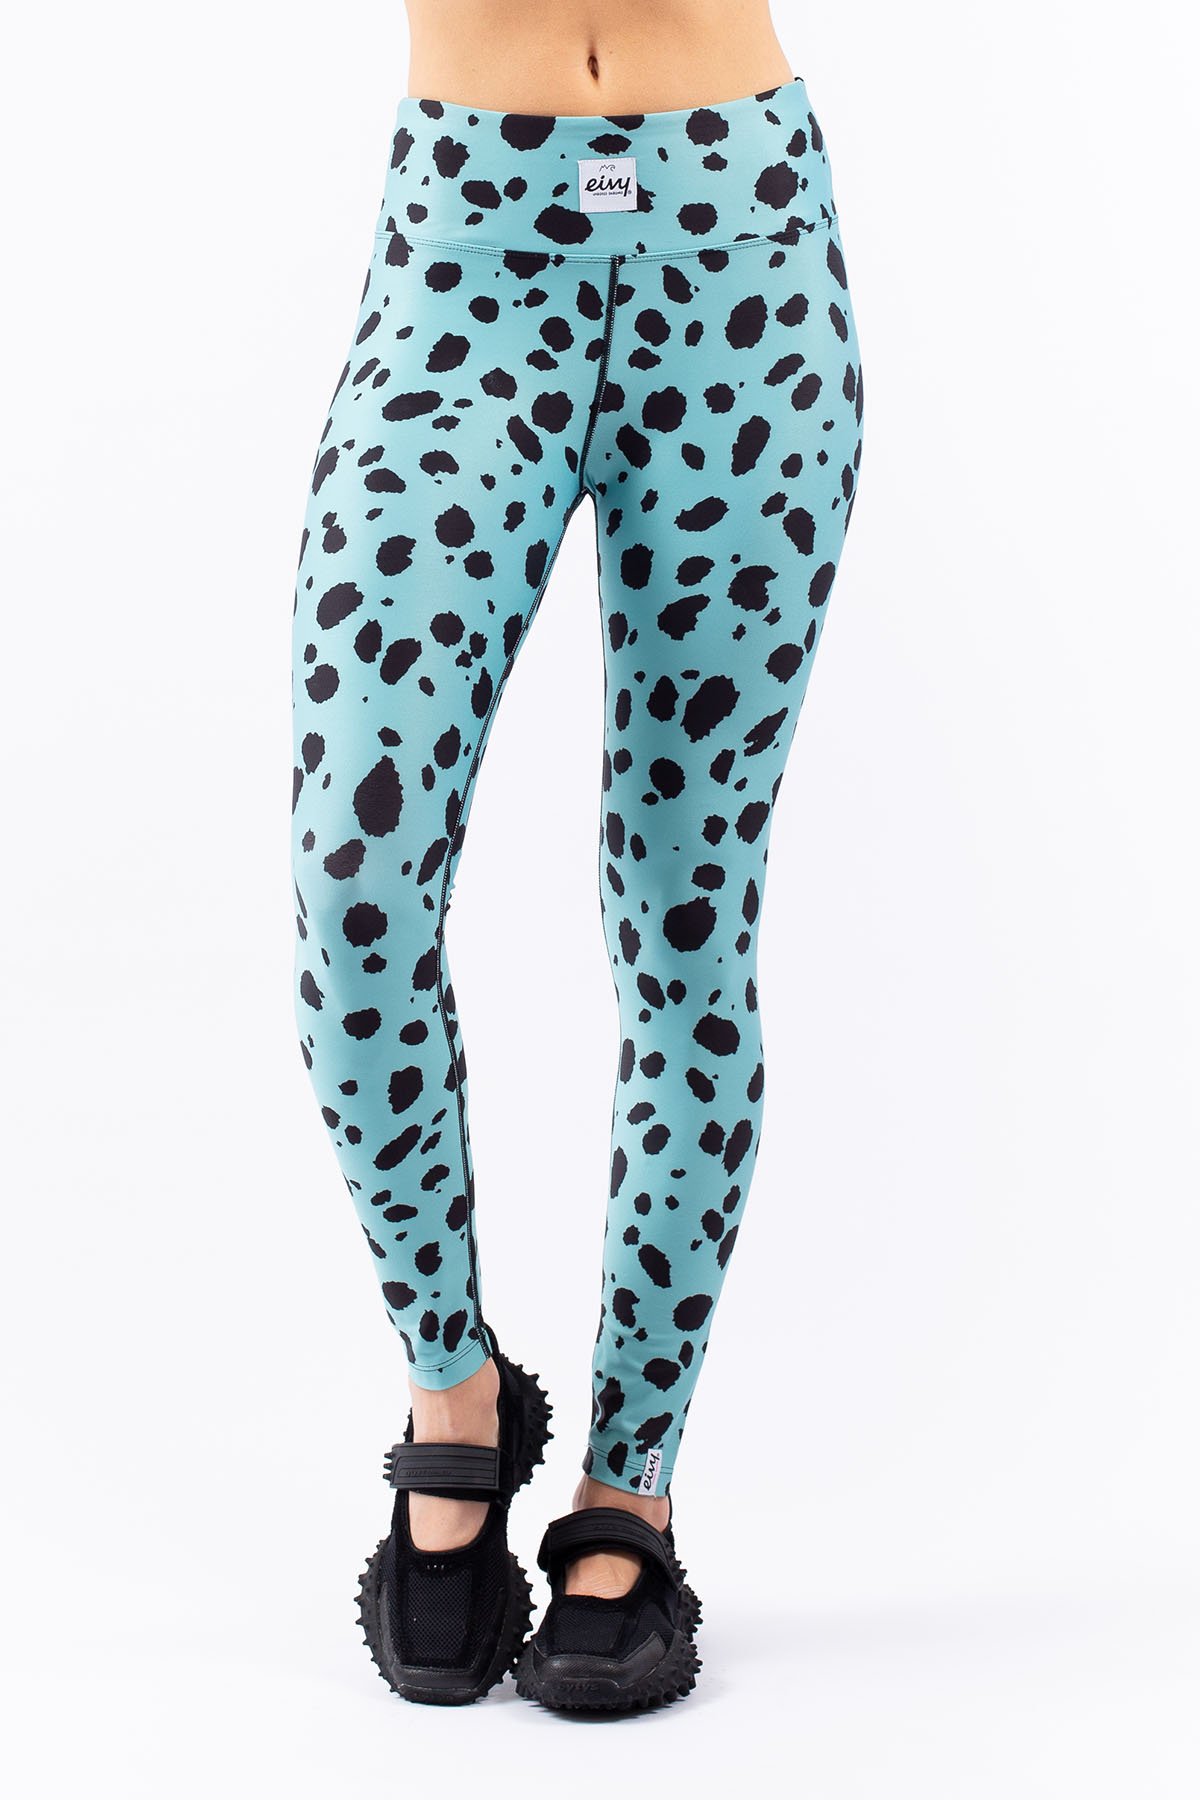 Icecold Tights - Turquoise Cheetah | XL